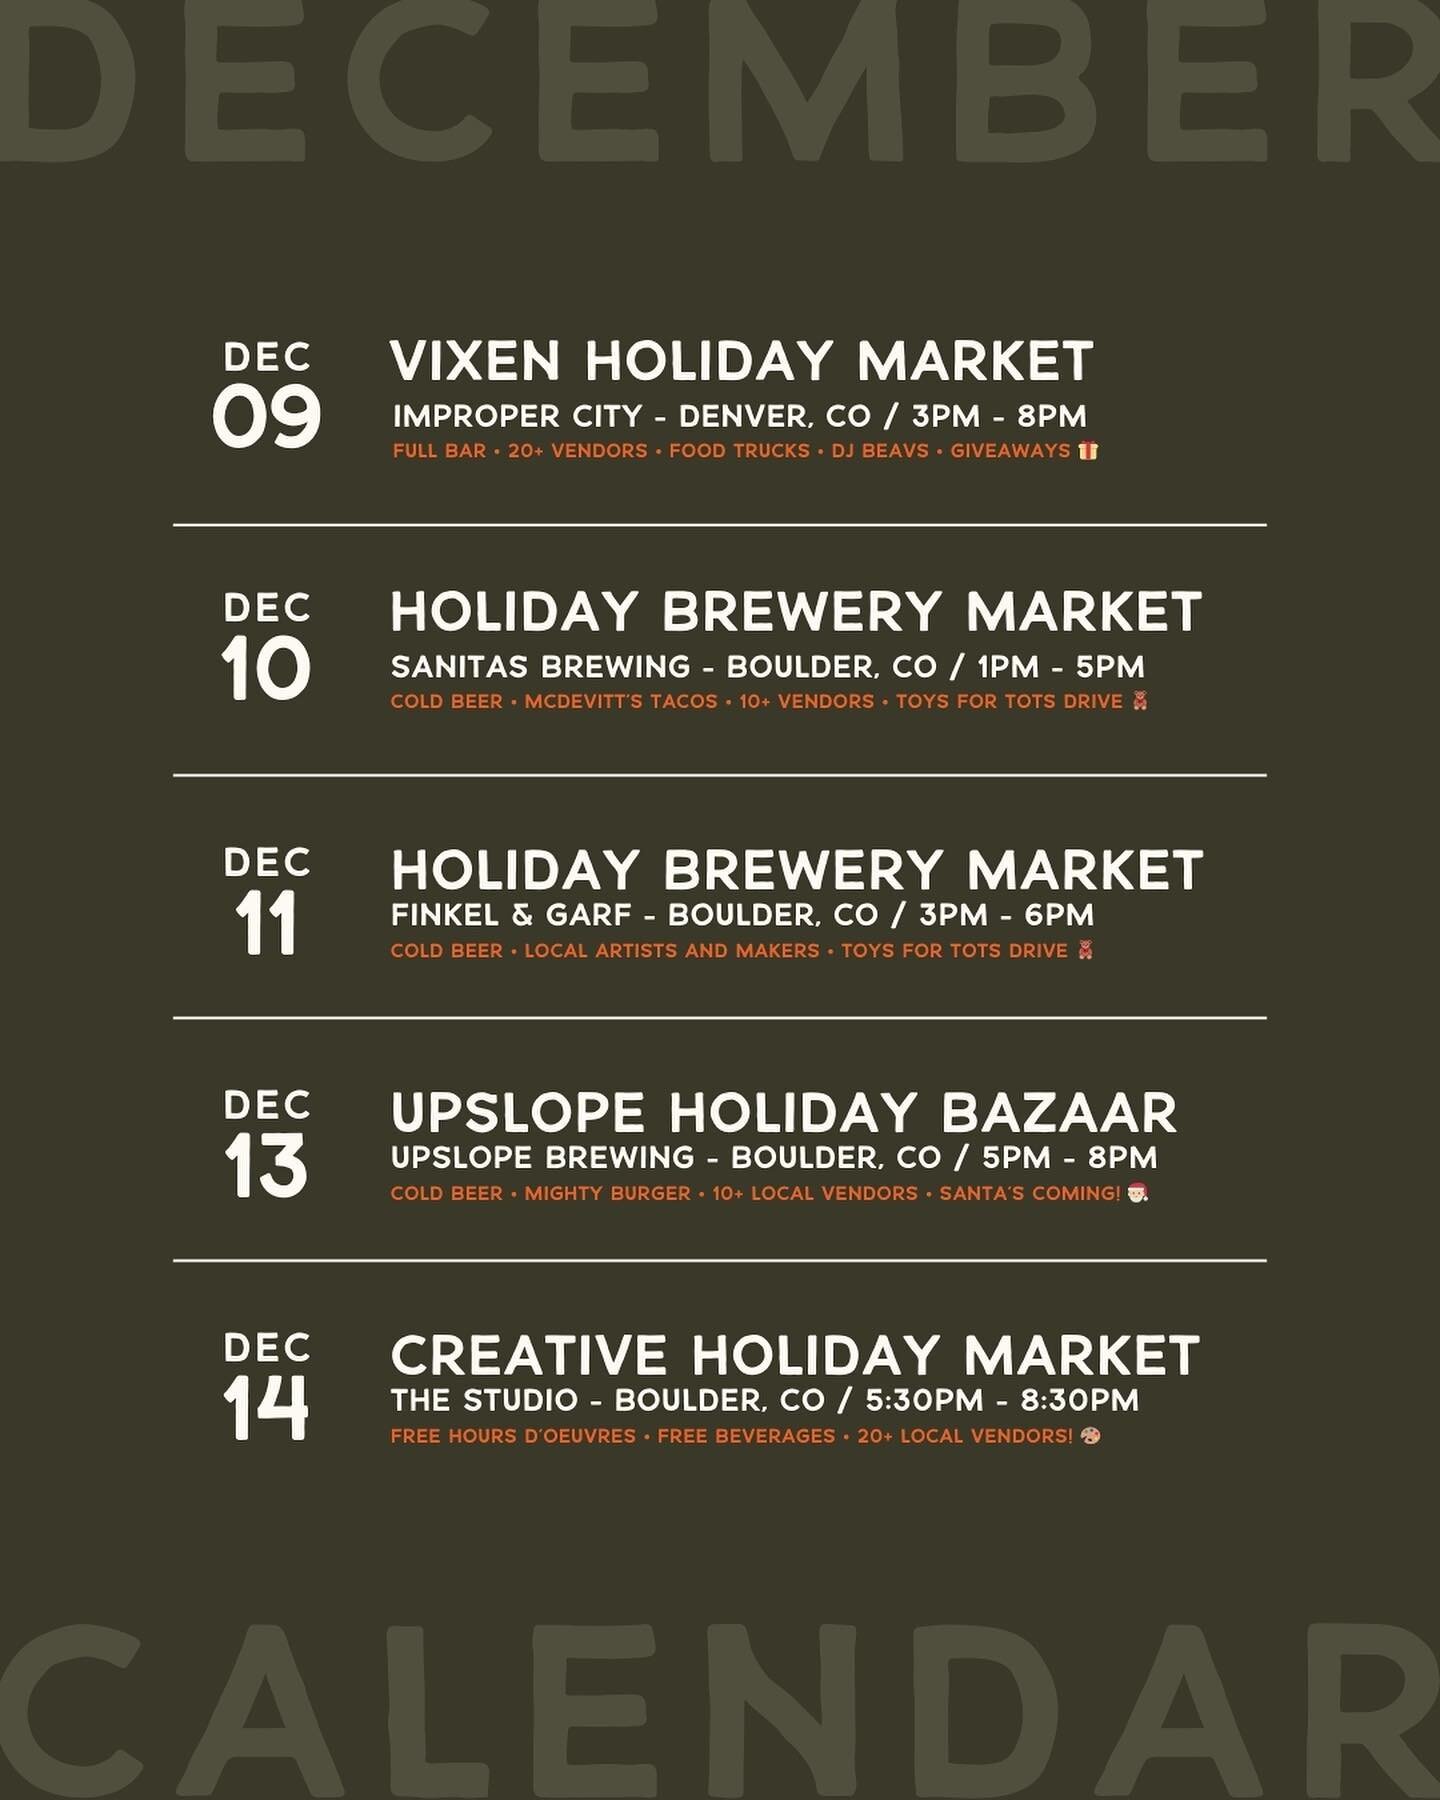 &lsquo;Tis the season for holiday markets! Catch us at these pop-up events over the next week or so. There&rsquo;s no shortage of chances to shop small and local (and have a beer while doing so!) 🍺🎁✨ 

#denvermakers #coloradomaker #coloradoartist #